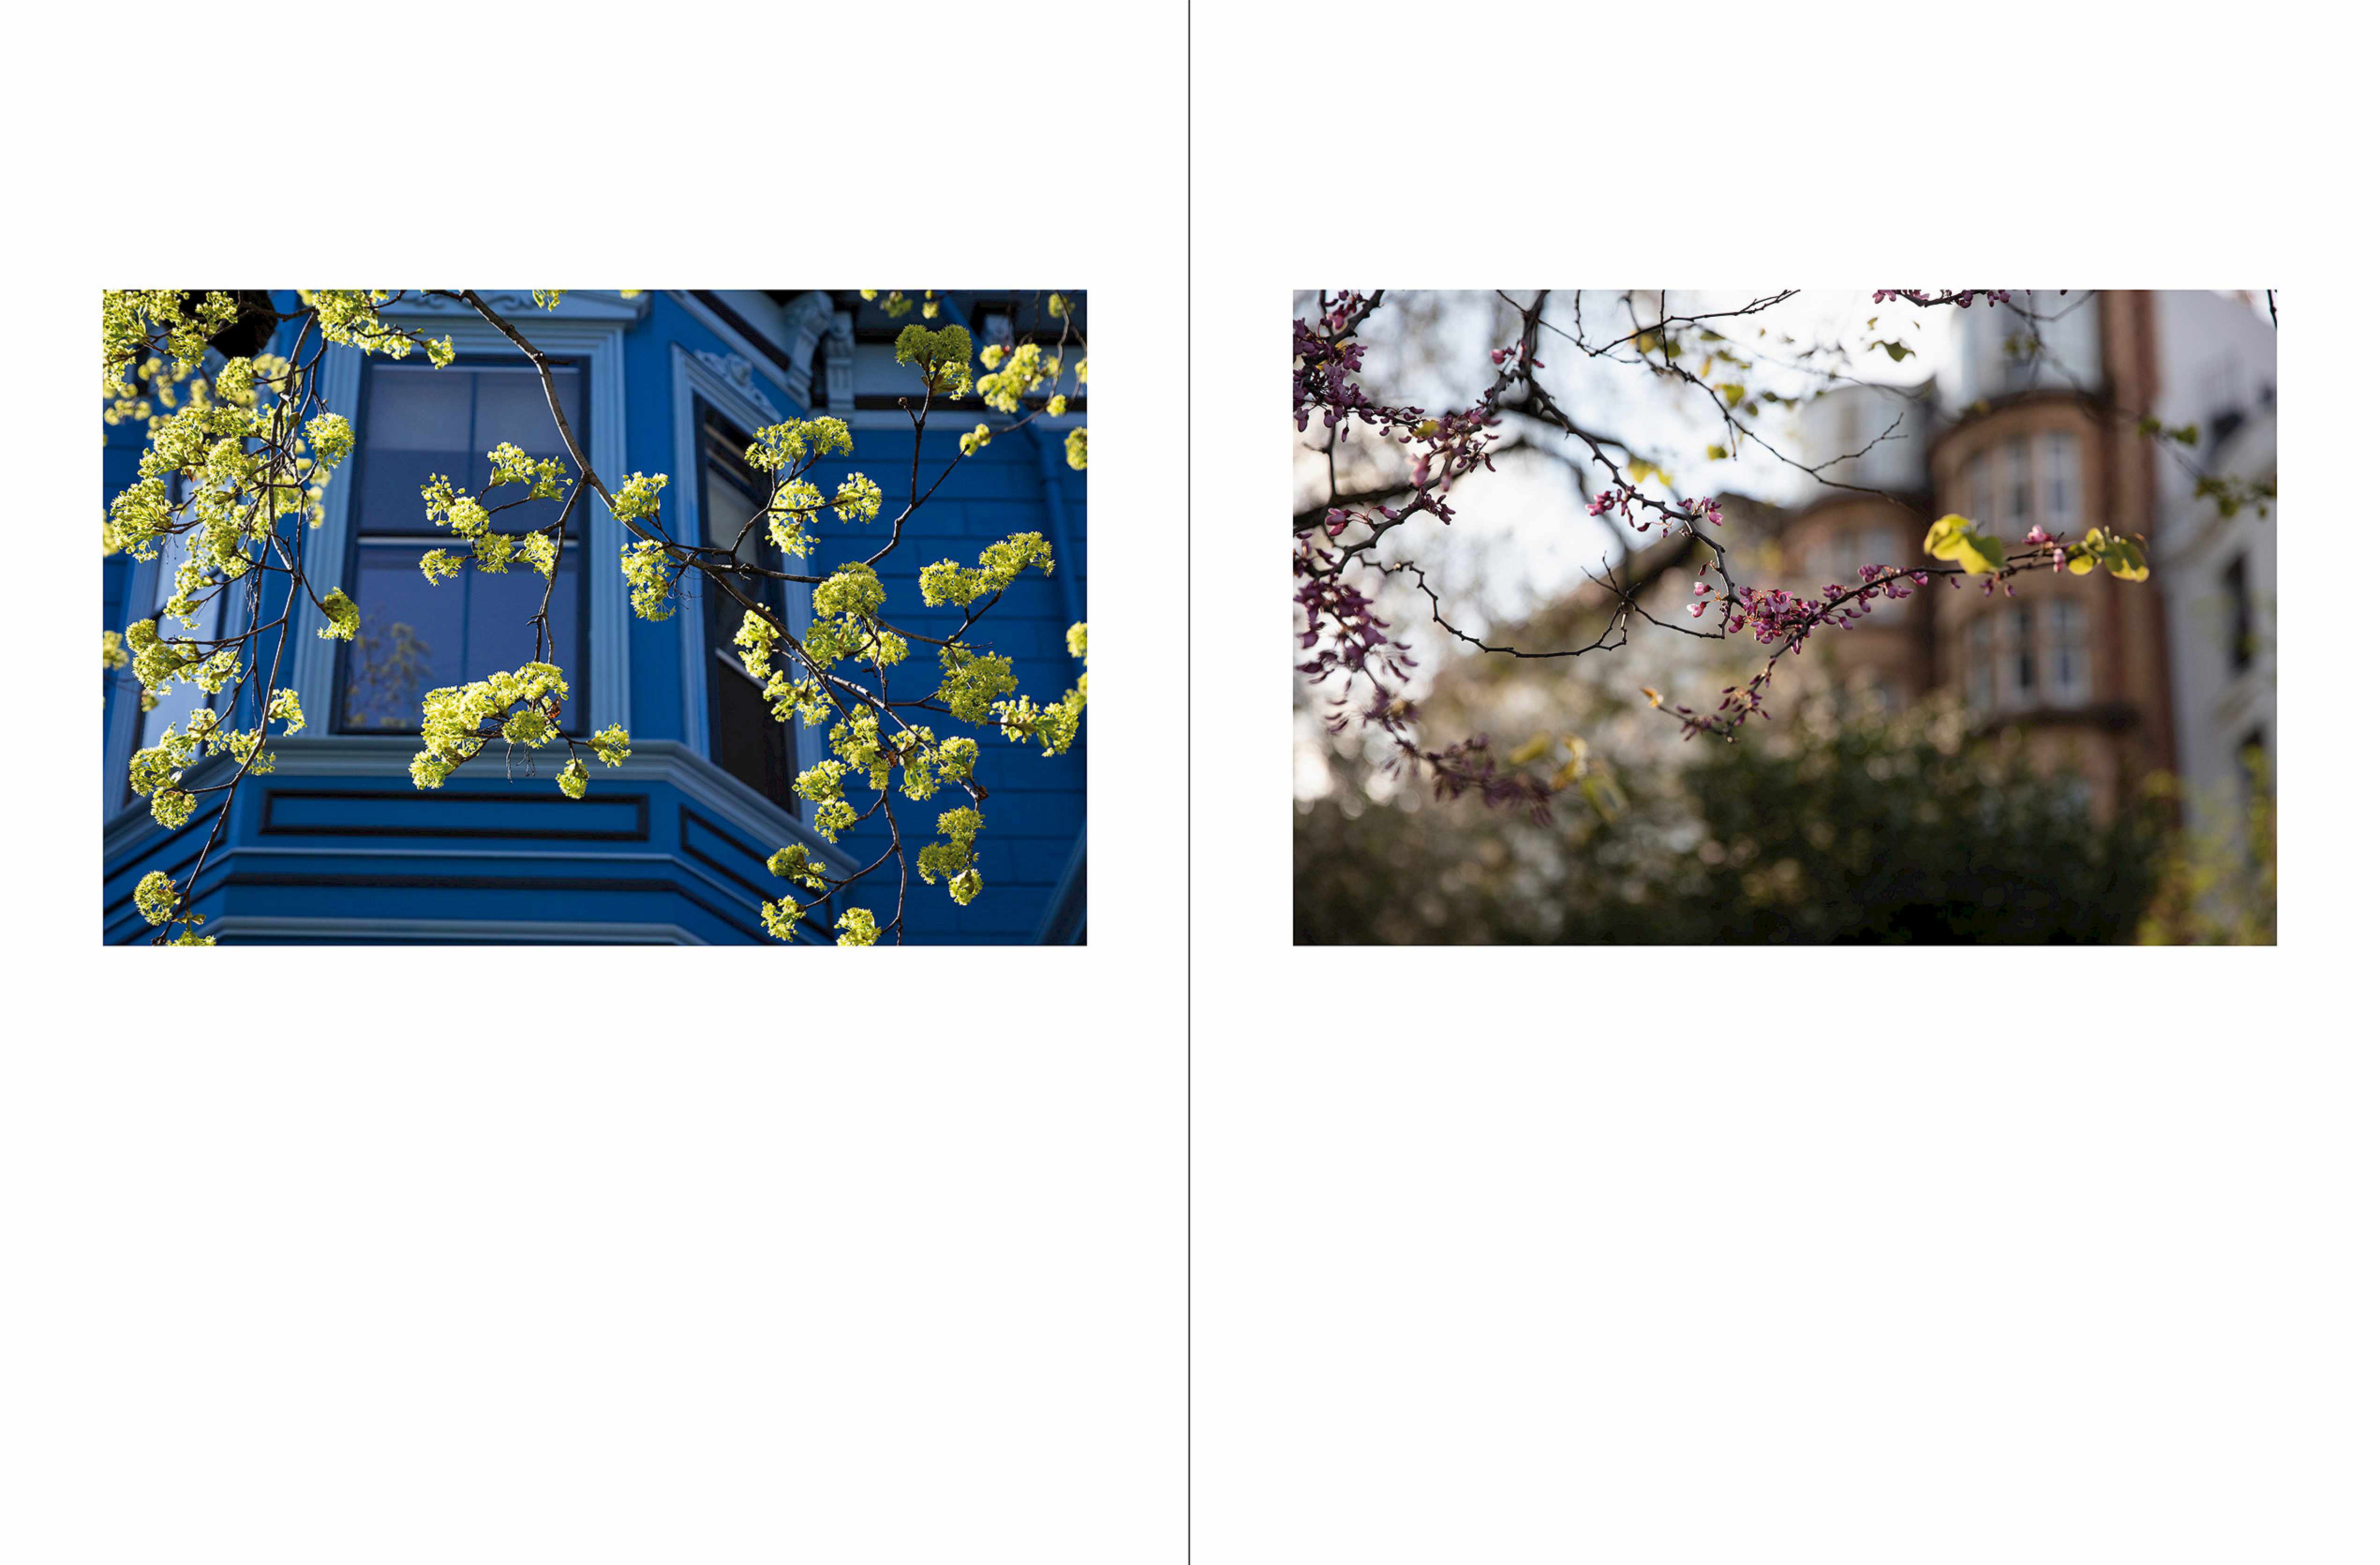 To look at things in bloom 07 - Photographs by Scott Mead and words by A.E. Housman